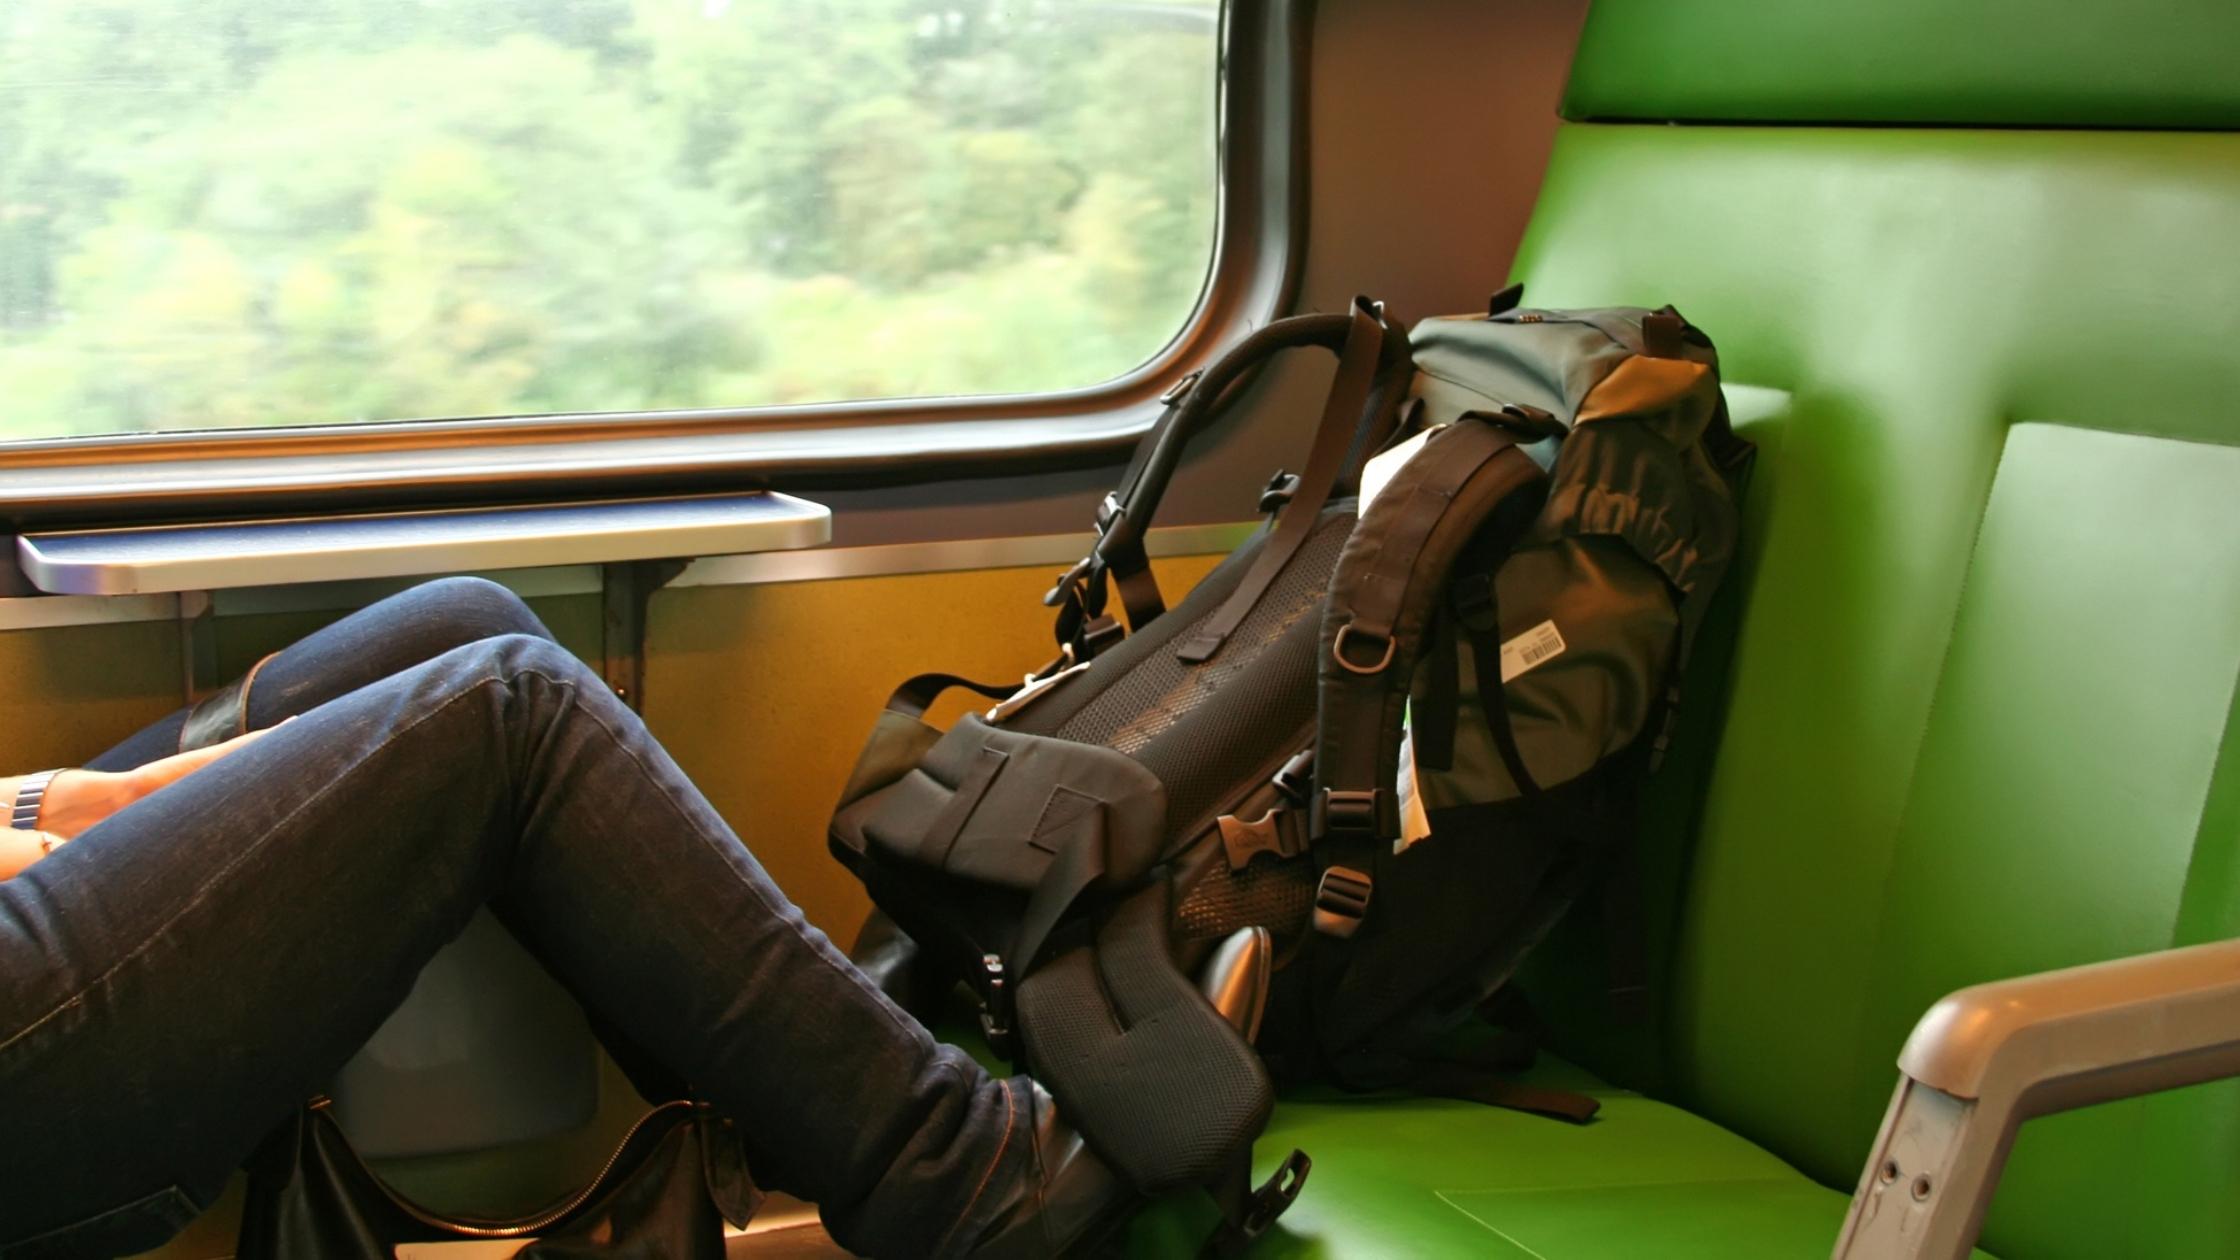 travel in comfort, backpack, stay busy while traveling